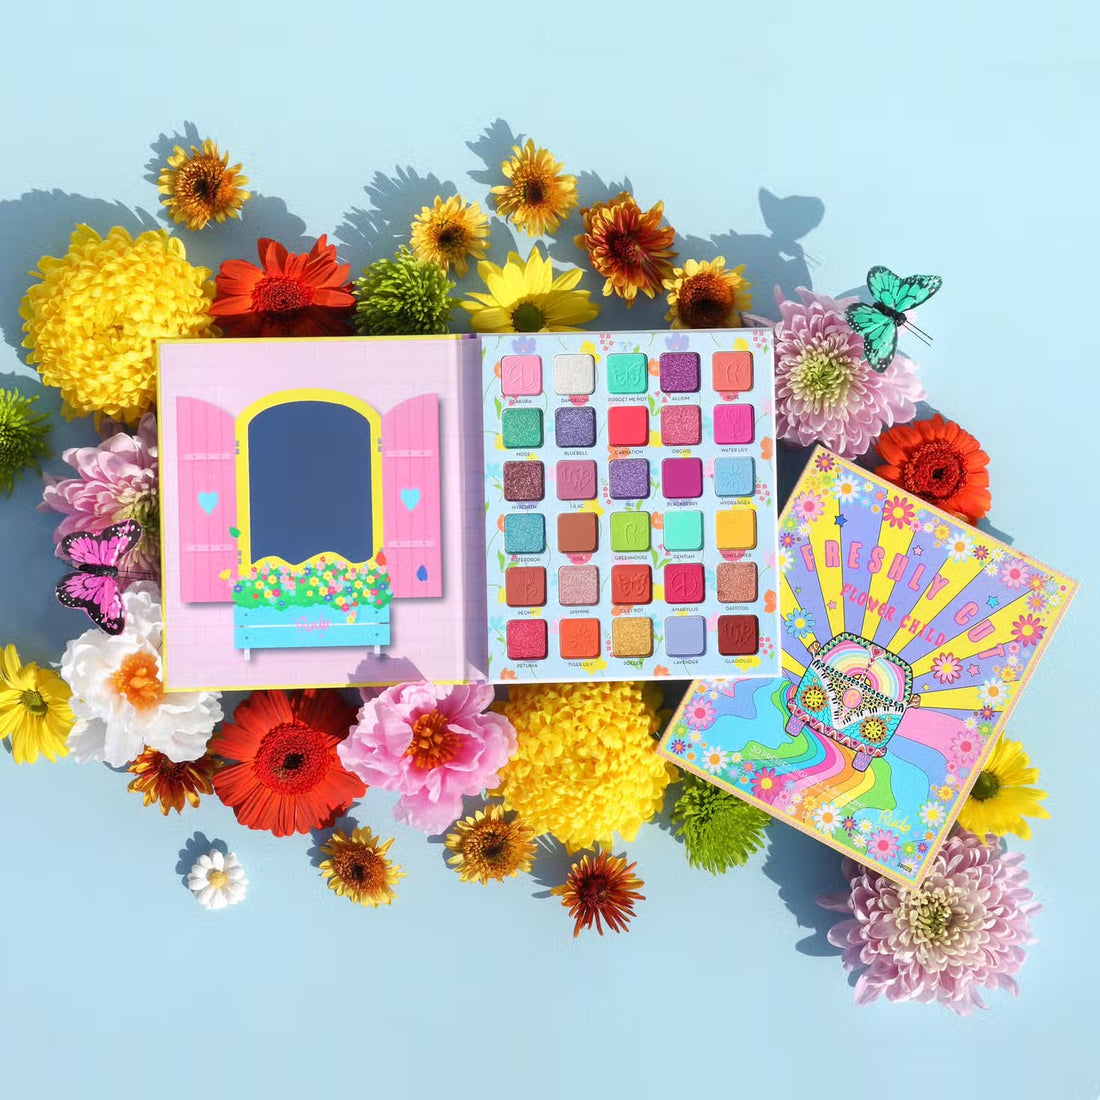 Rude Cosmetics Flower Child 30 Pressed Pigment and Shadows Palette